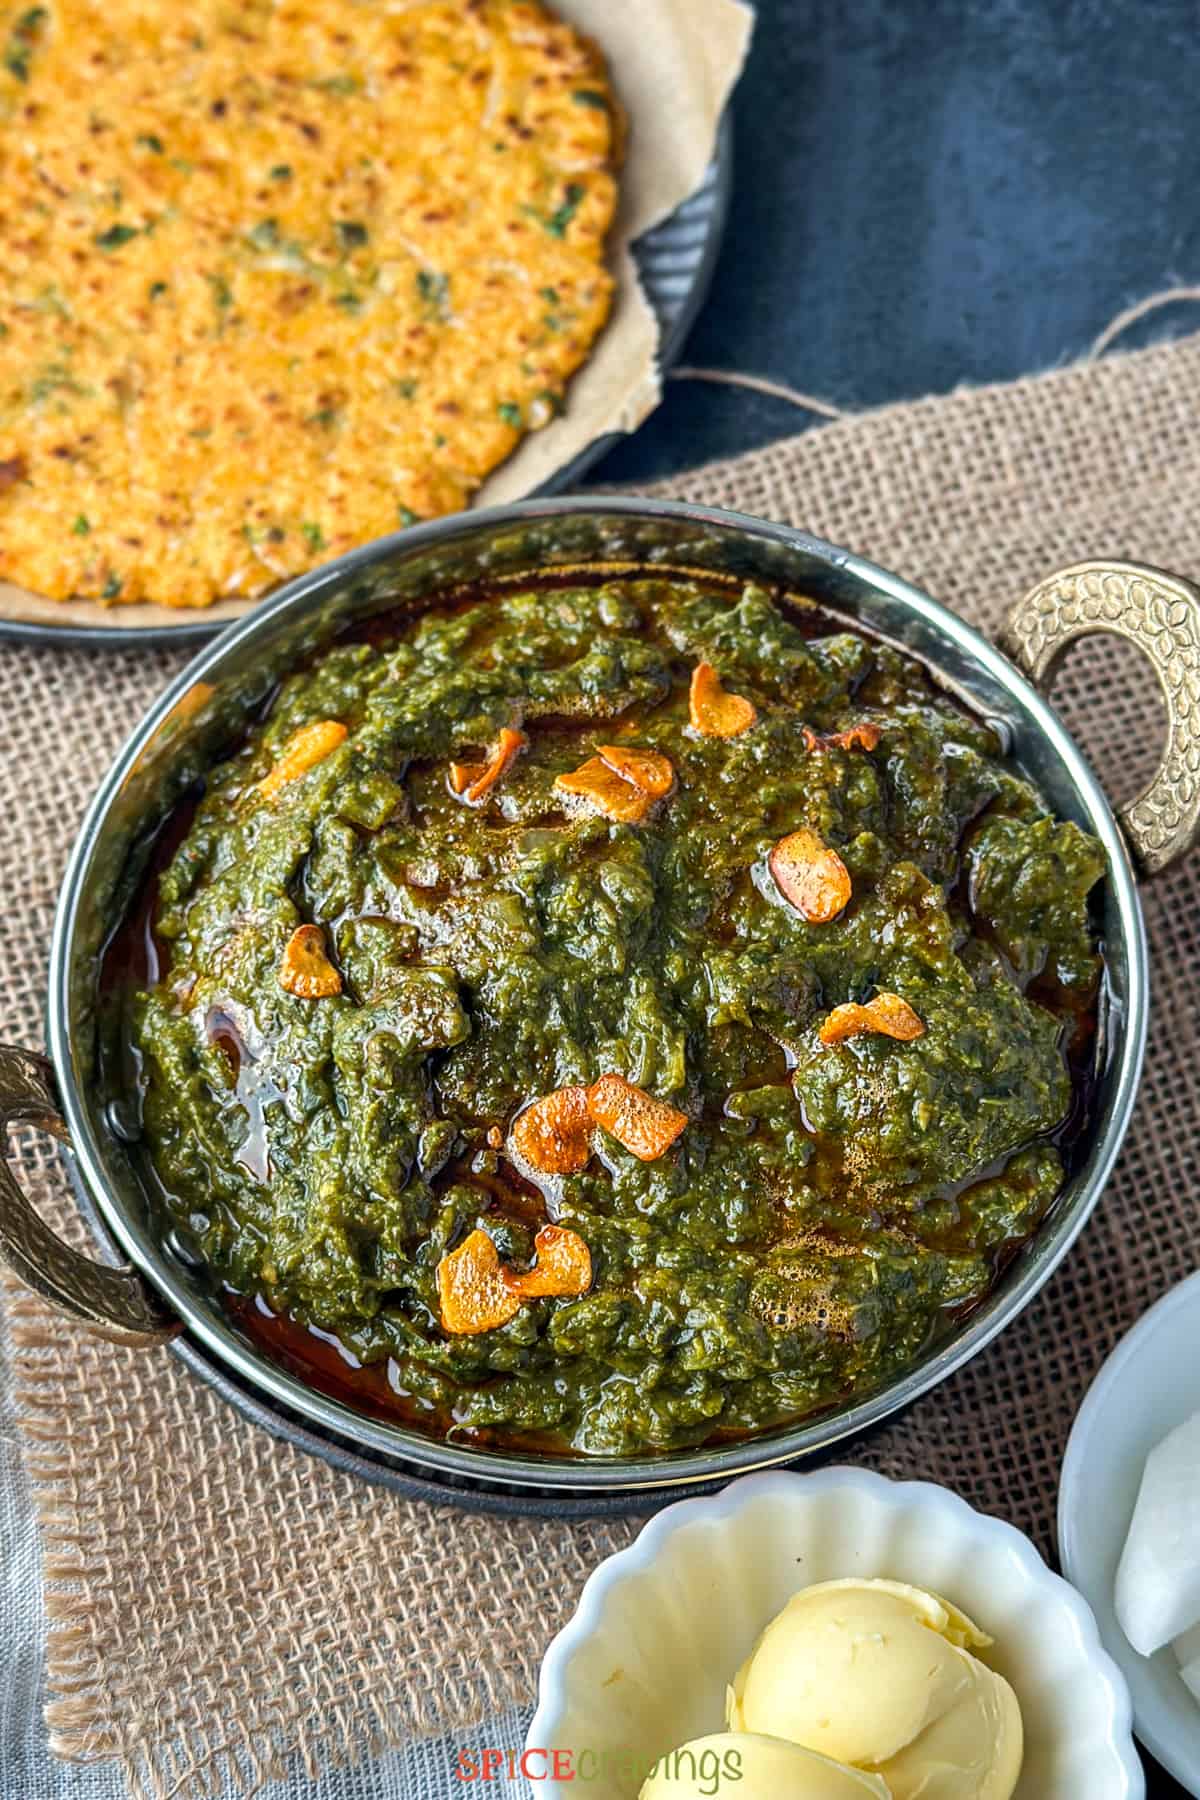 Sarson ka saag (spiced greens) in a copper bowl with garlic and chili oil